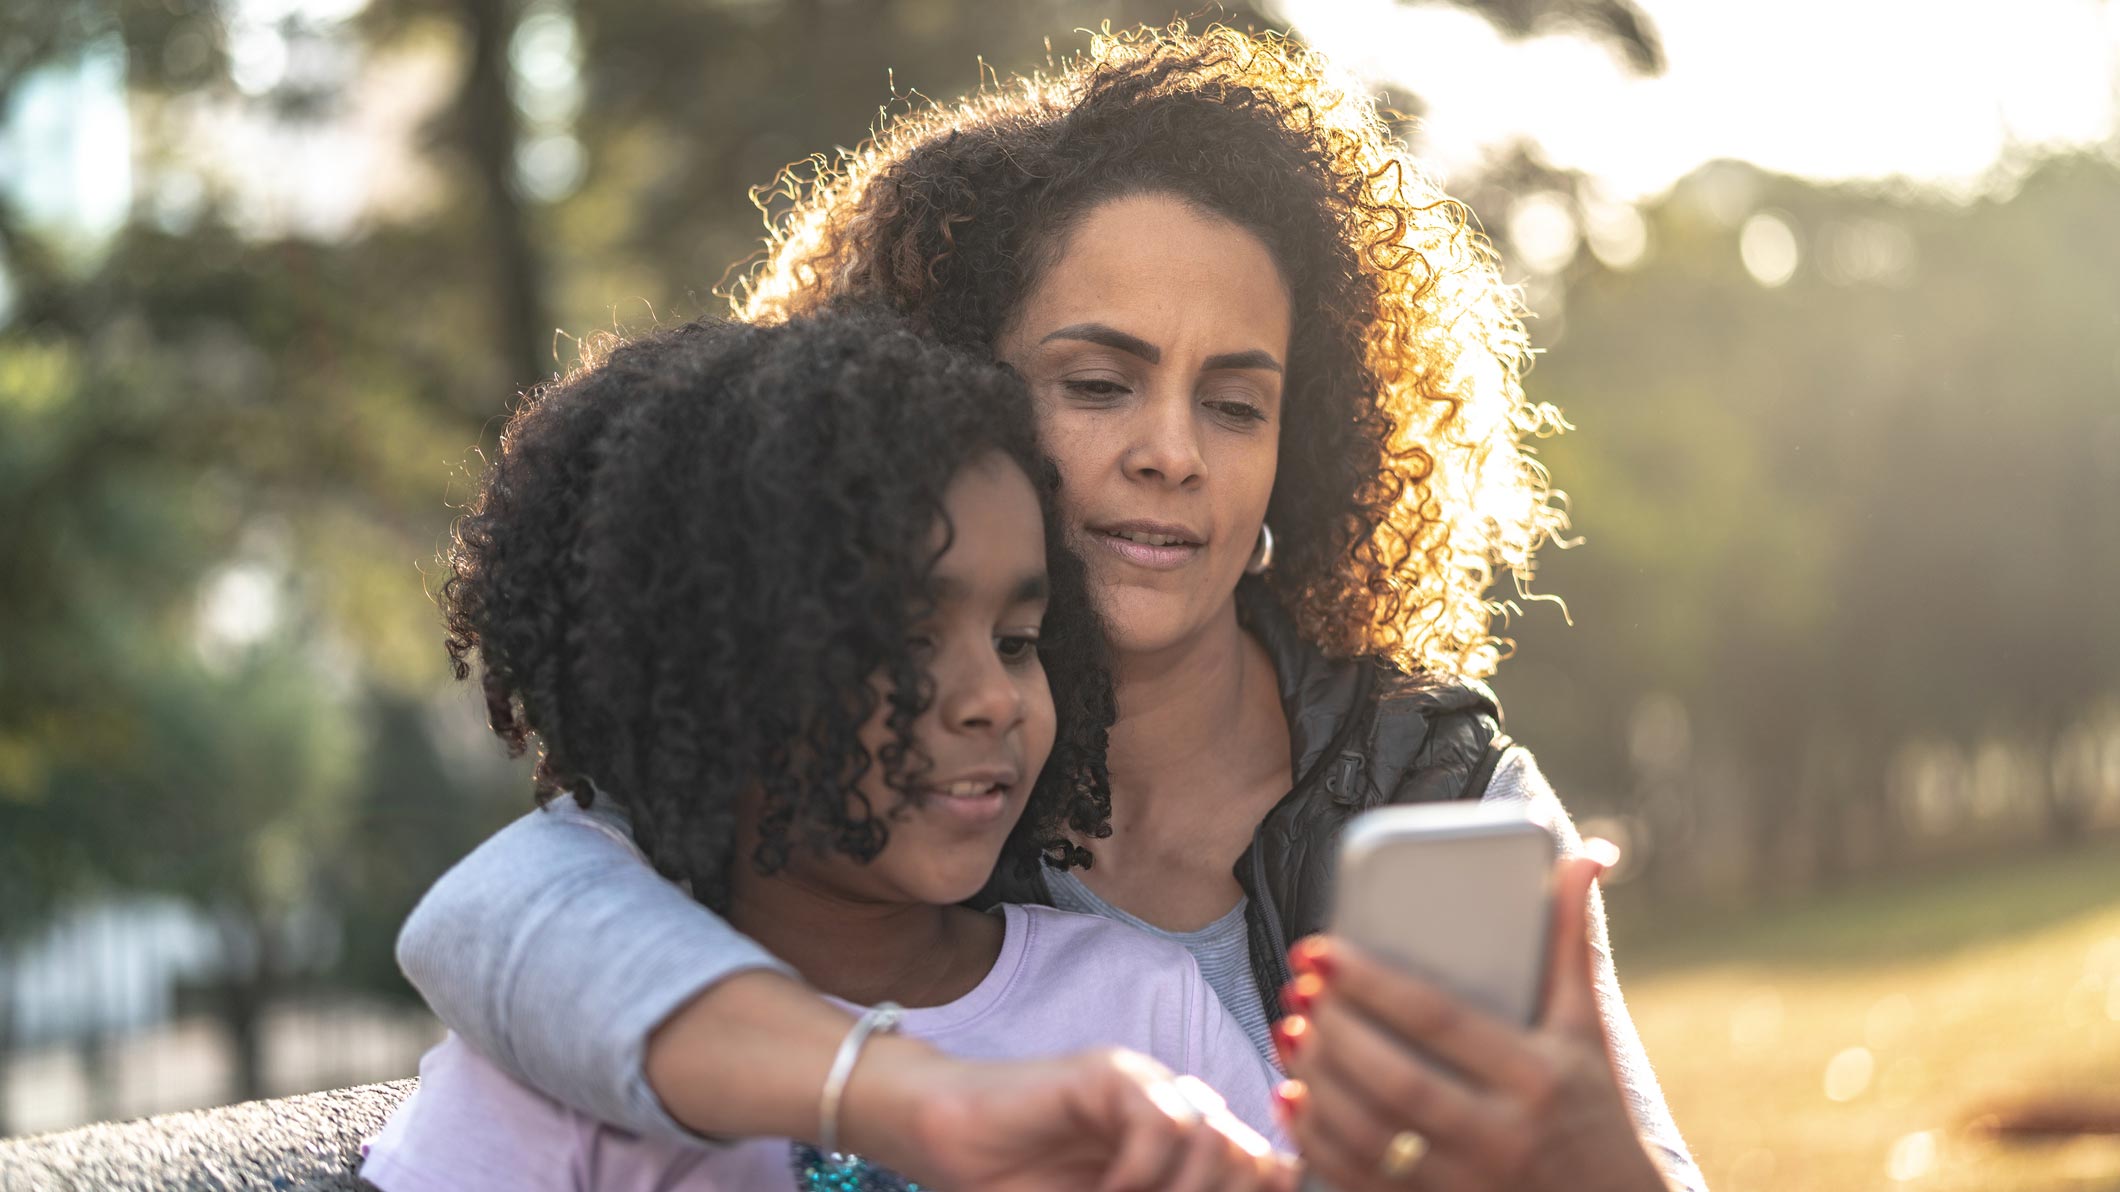 Five things you should track your child’s phone